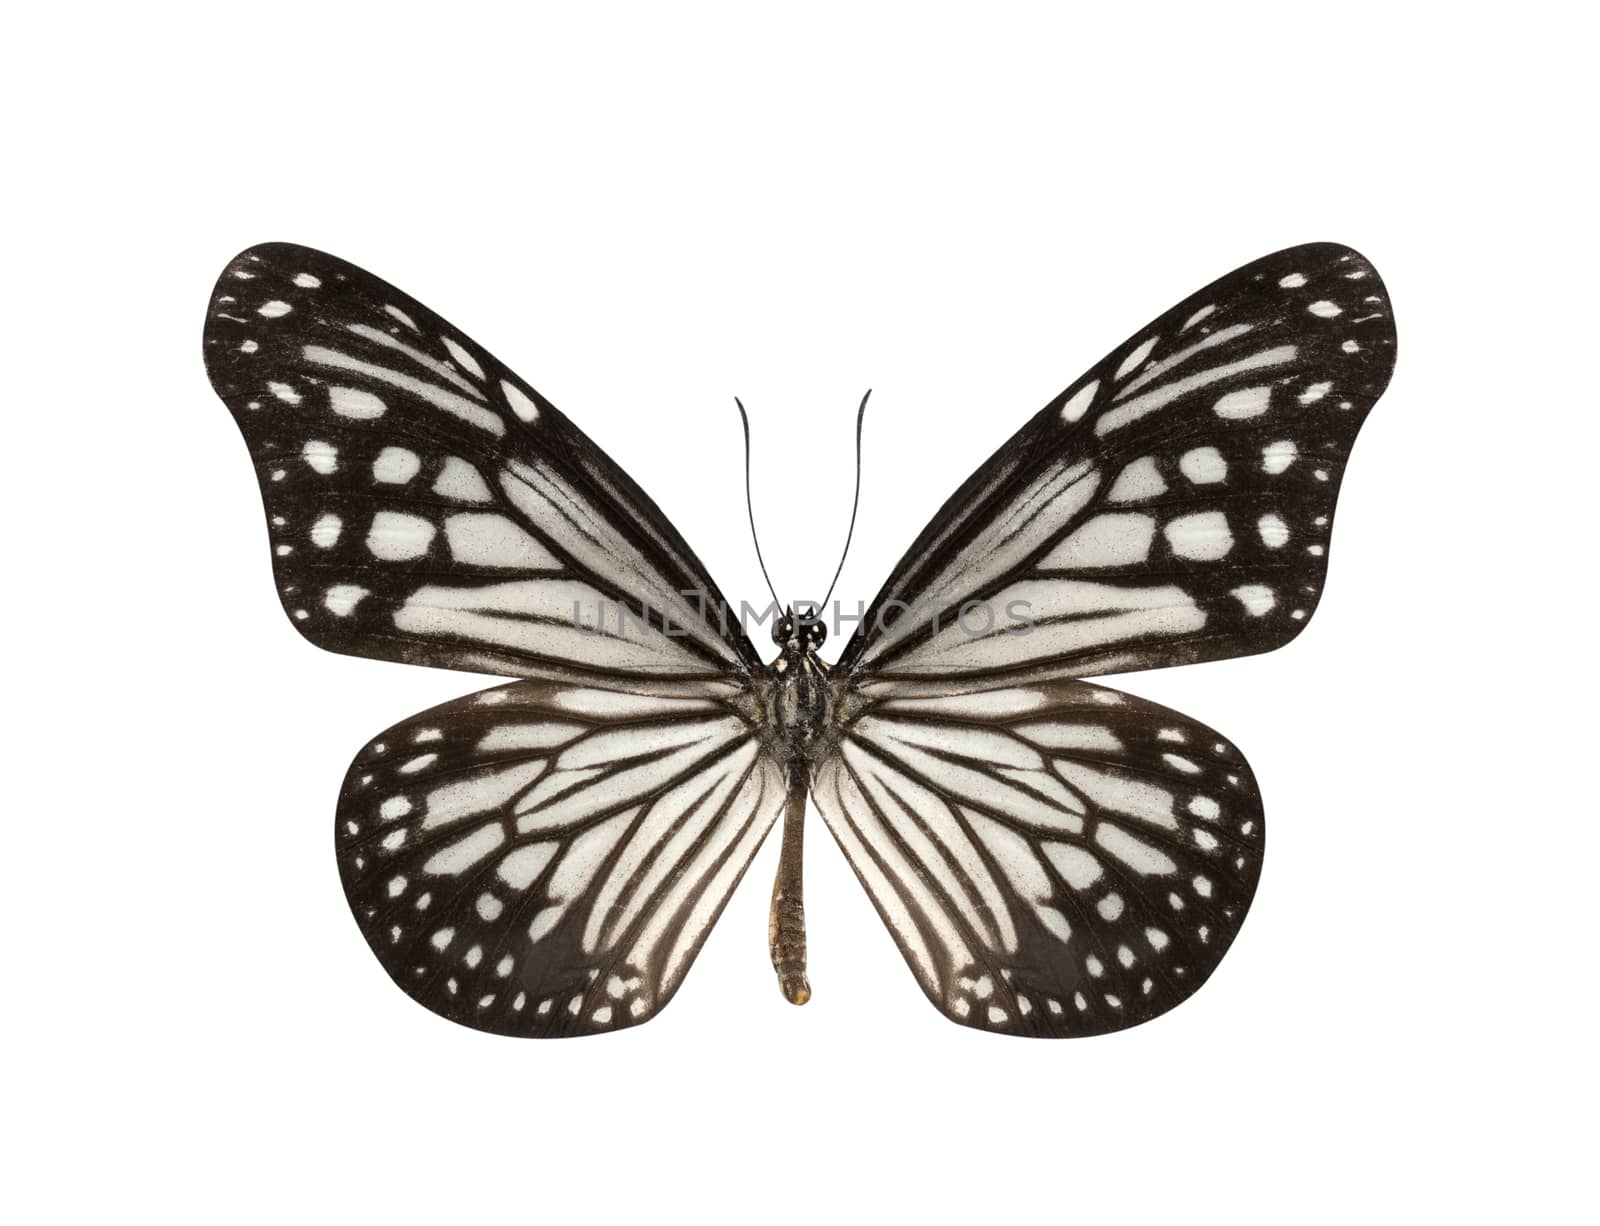 Black and White Butterfly isolated on white background by pkproject